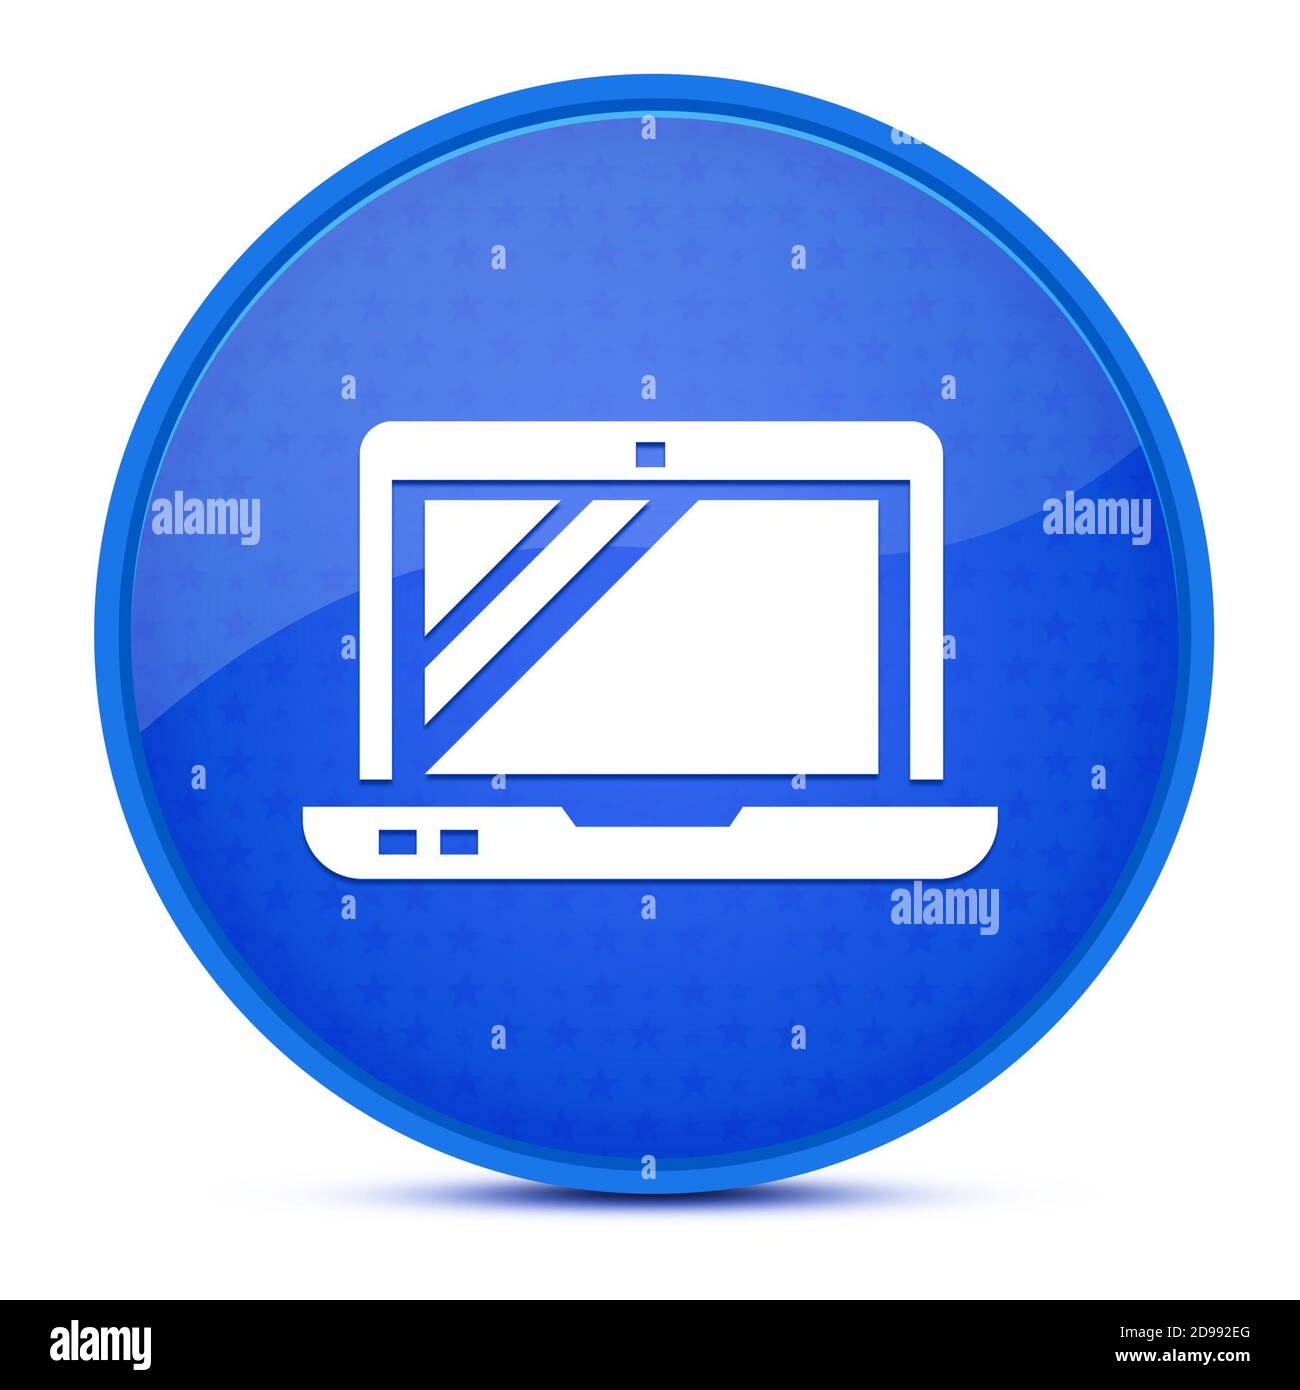 Technical skill aesthetic glossy blue round button abstract illustration Stock Photo